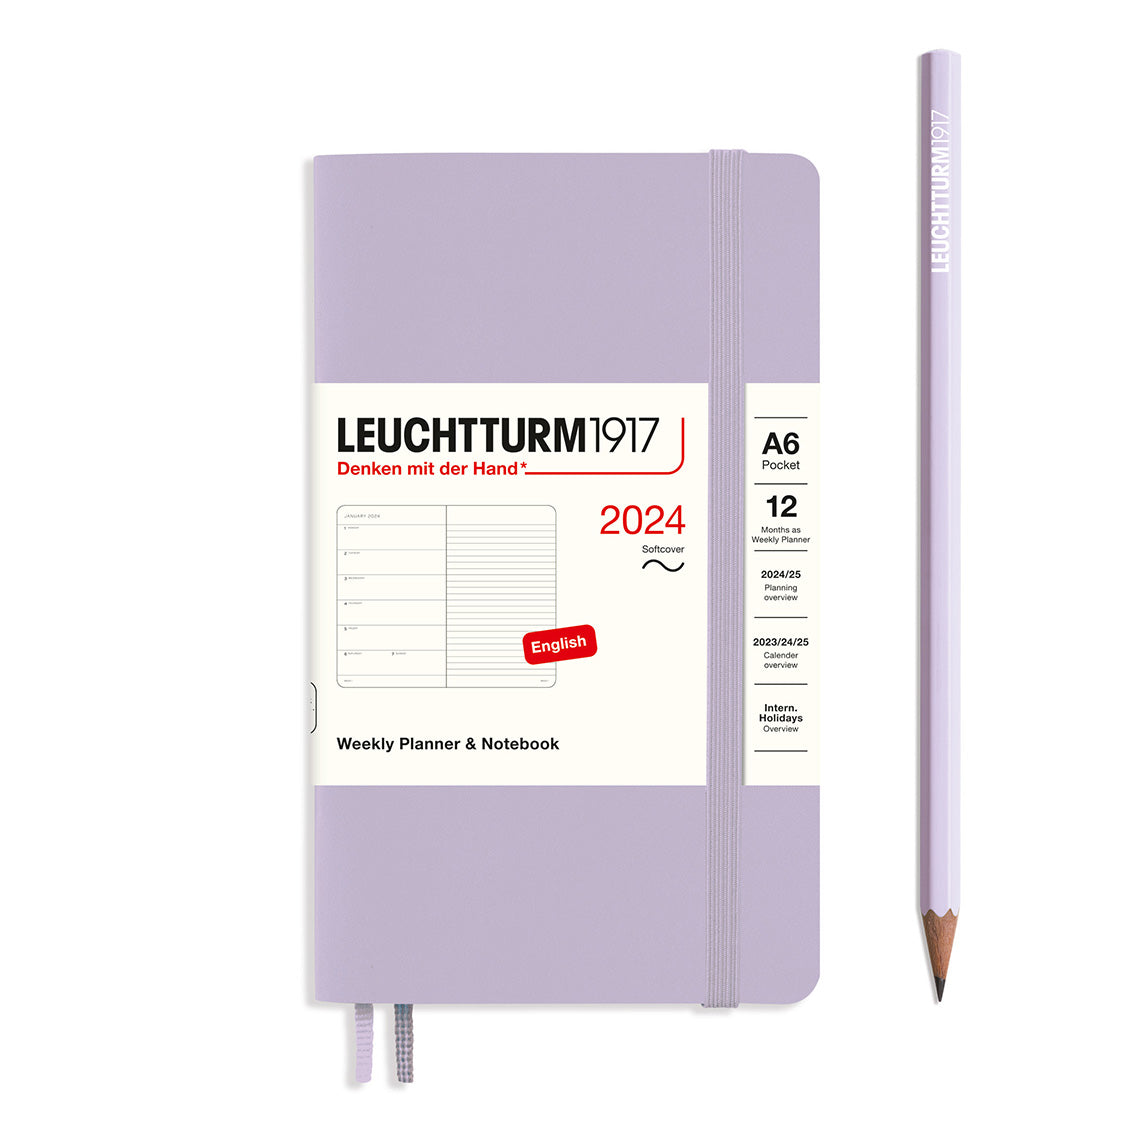 An image of a lilac planner with a lilac elastic band holding it together and a cream paper wrap around the middle stating the business name Leuchtturm1917, that it is for the year 2024, it is a weekly planner and notebook, is A6 in size and an English language version. It has an image on the wrap showing the inside layout which is a week on the left hand page and a notes page on thr right hand page. A lilac pencil is shown at the side of the planner.